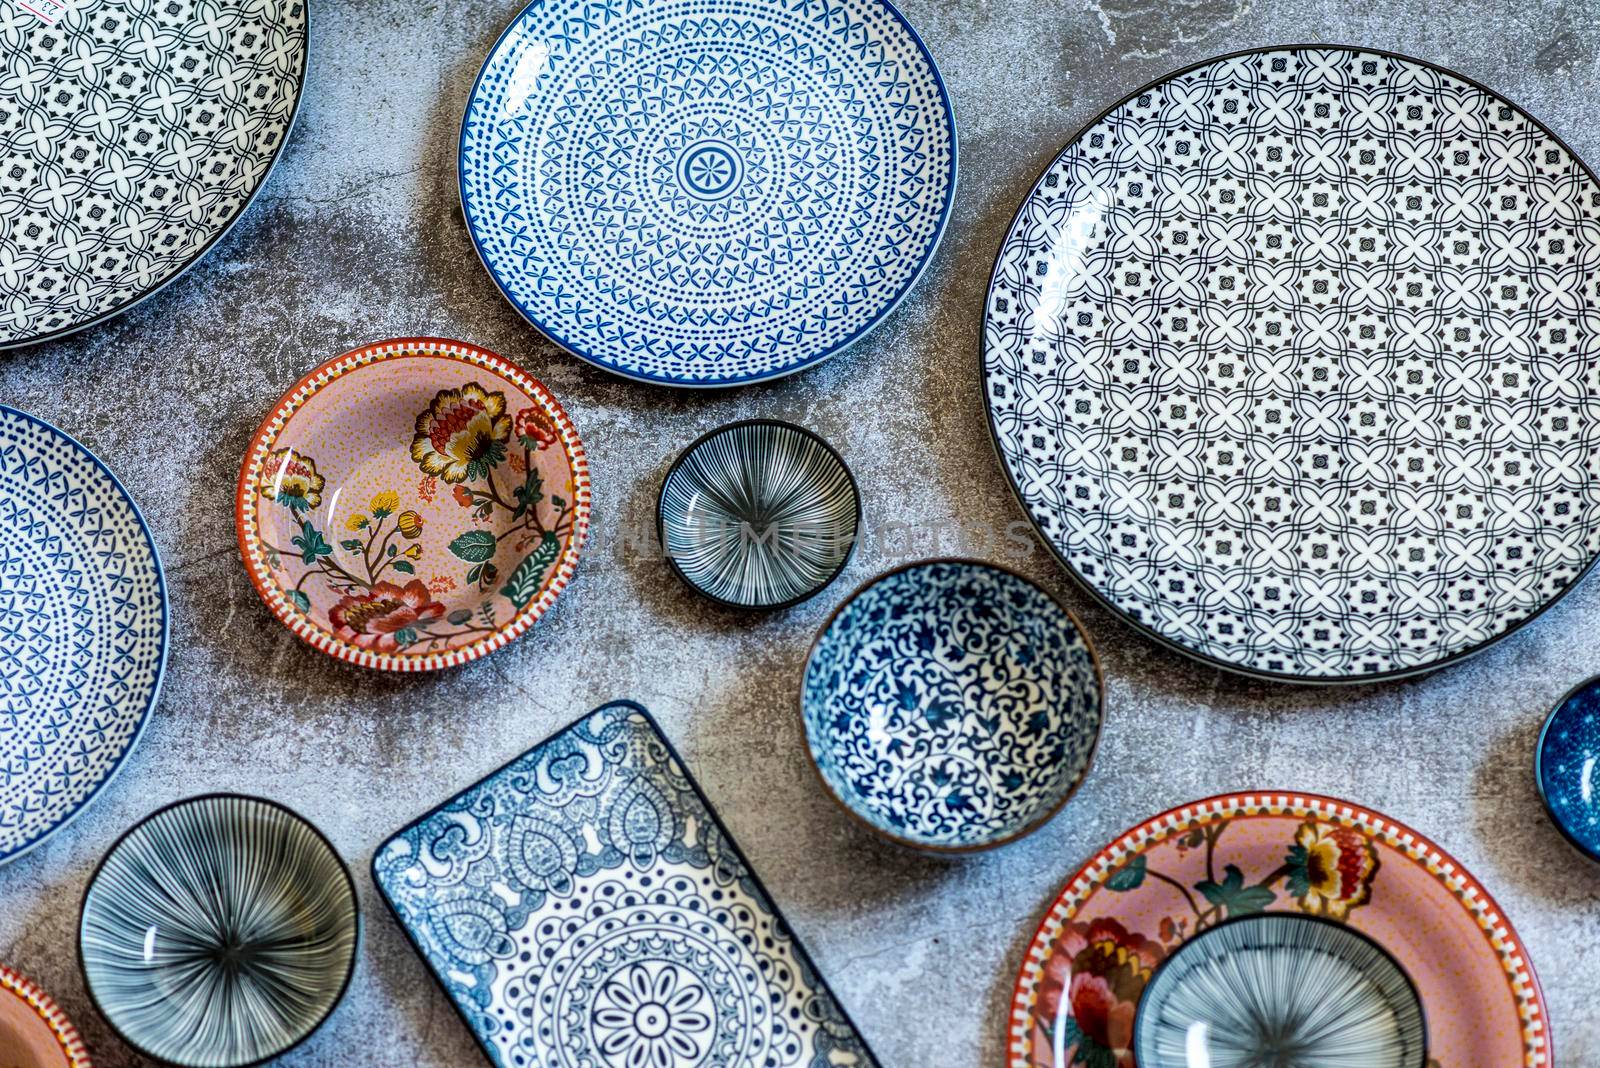 Beautiful traditional Moorish porcelain ceramic plates. illustrated middle eastern design. Marrakech Morocco. High quality photo